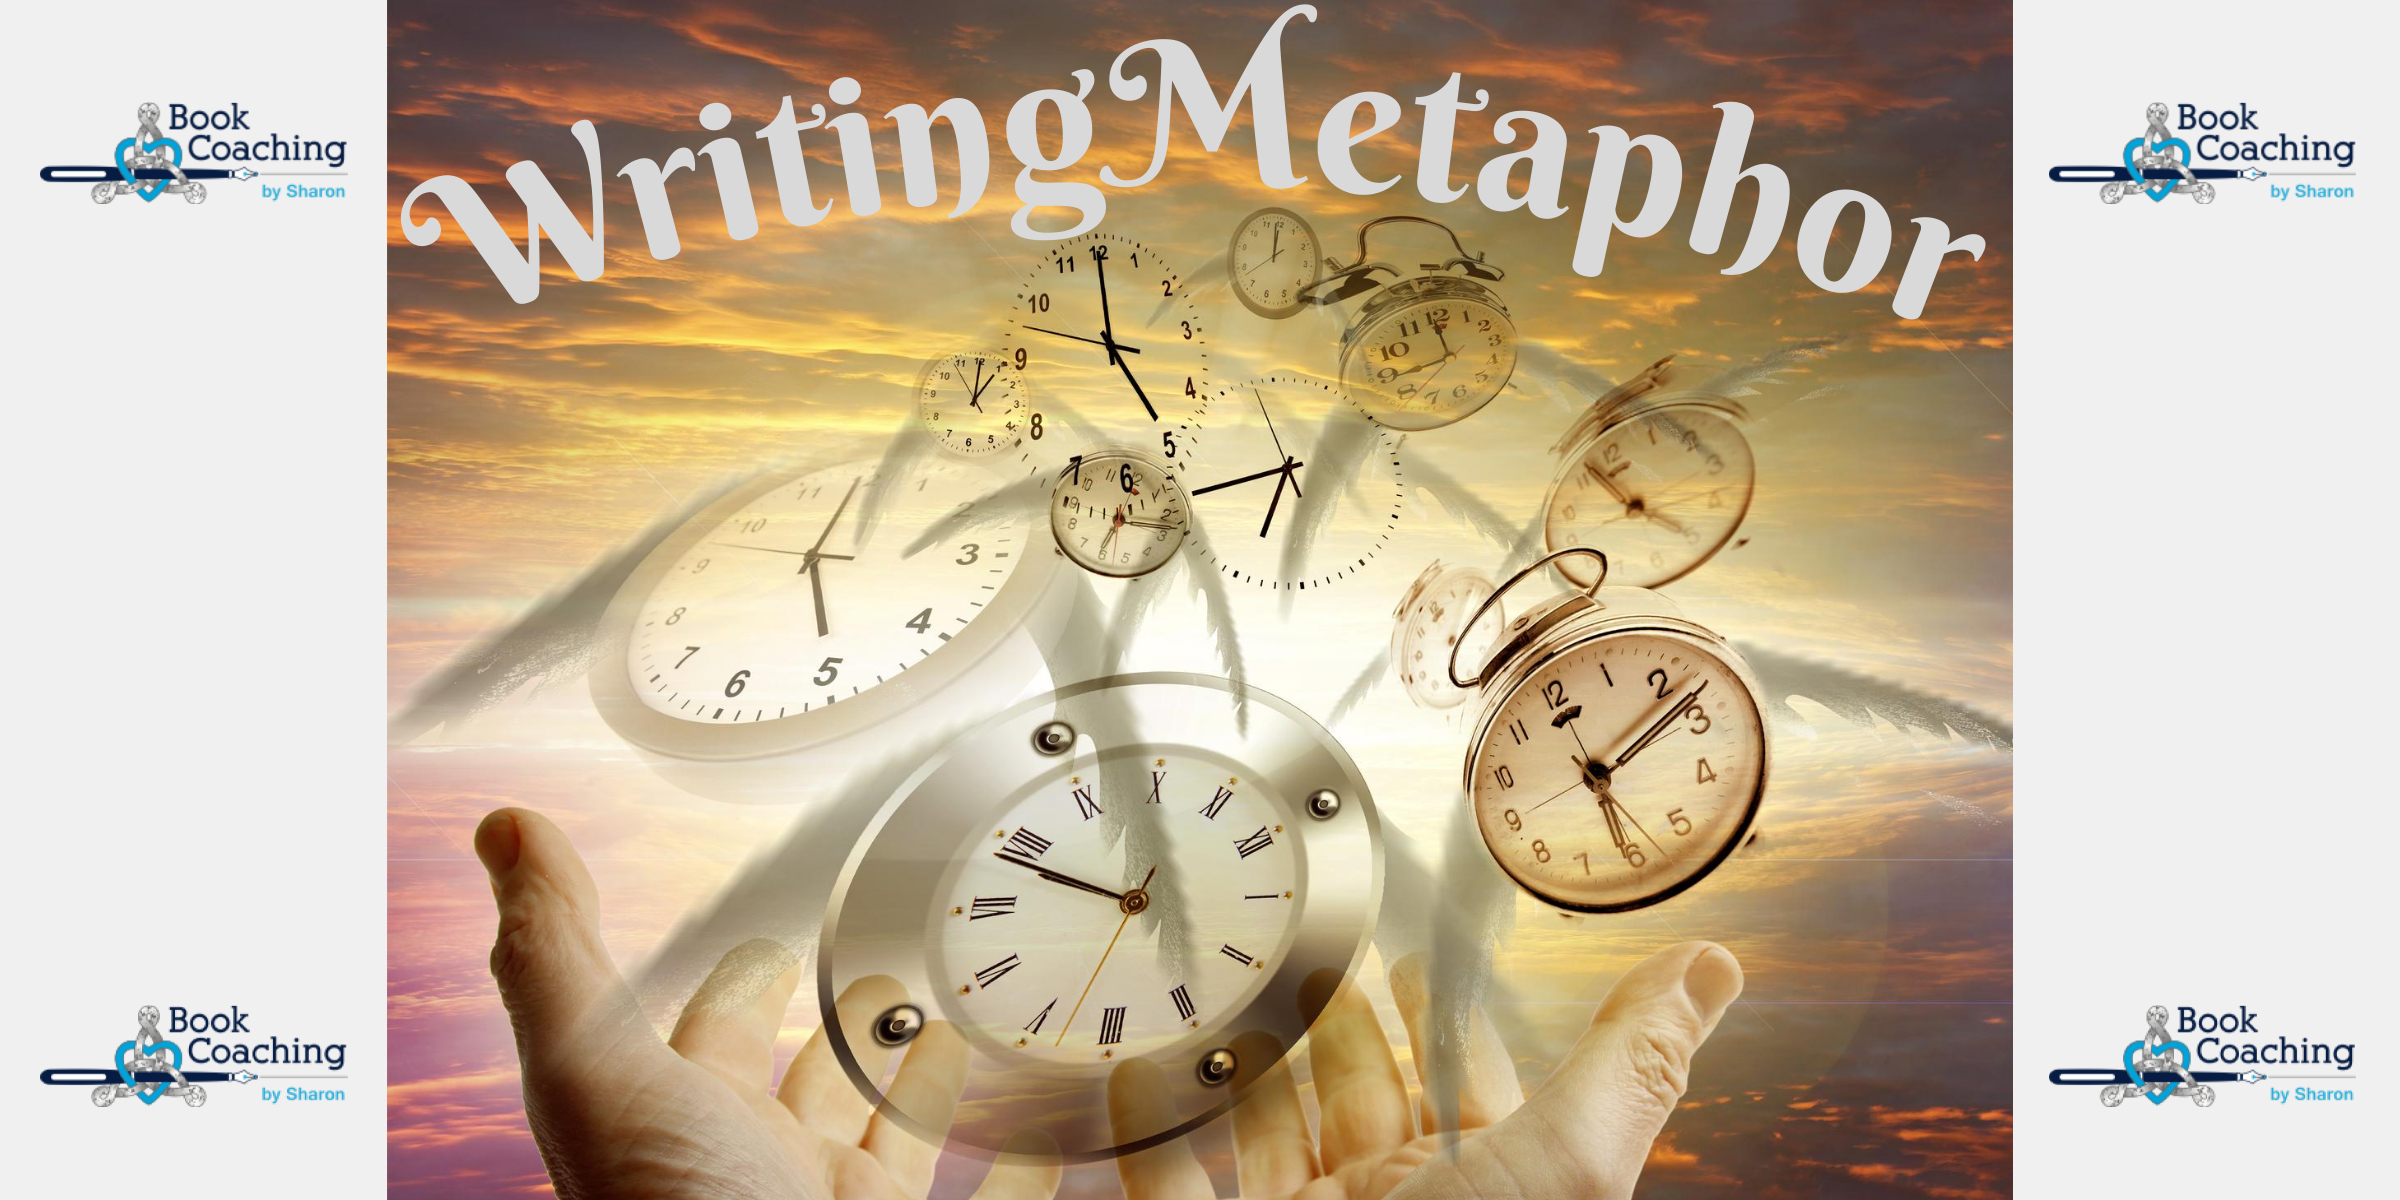 Image of time flying (hands releasing clocks with wings into the sky) with arched text that states "writing metaphor on a white background with book coaching by Sharon logos on all four corners.